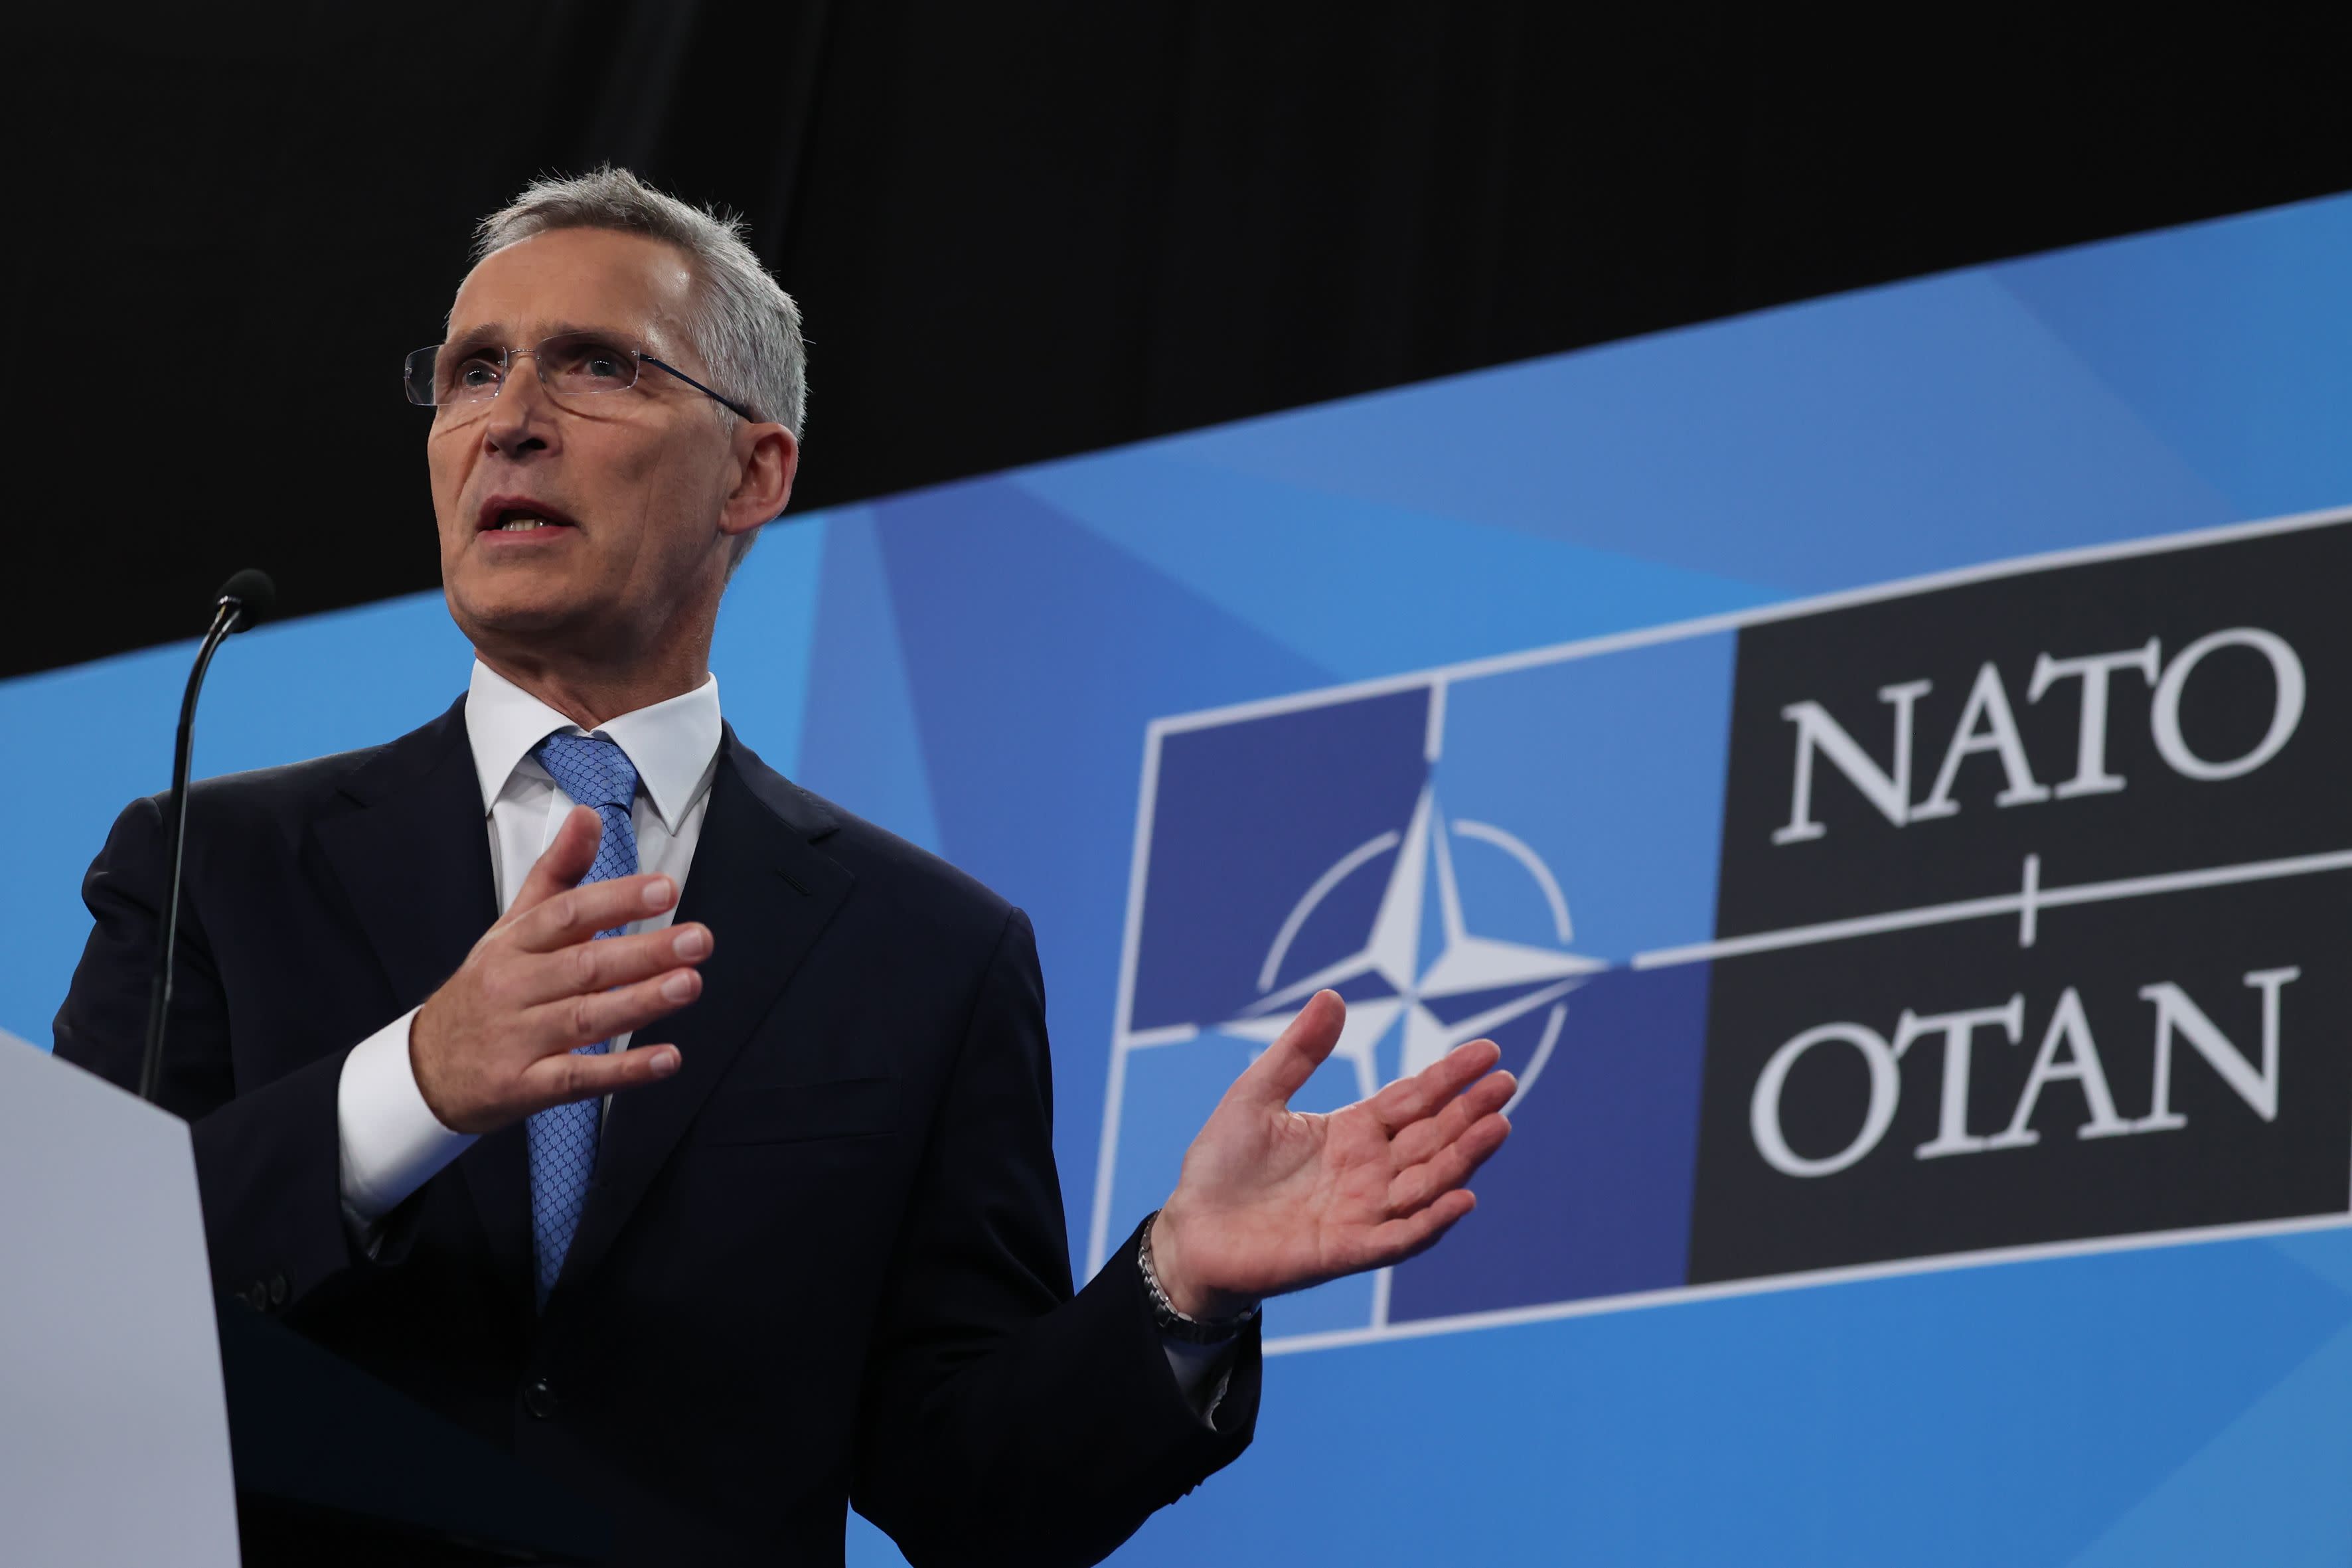 NATO chief: Finland’s proposal will be ratified before the Turkish elections